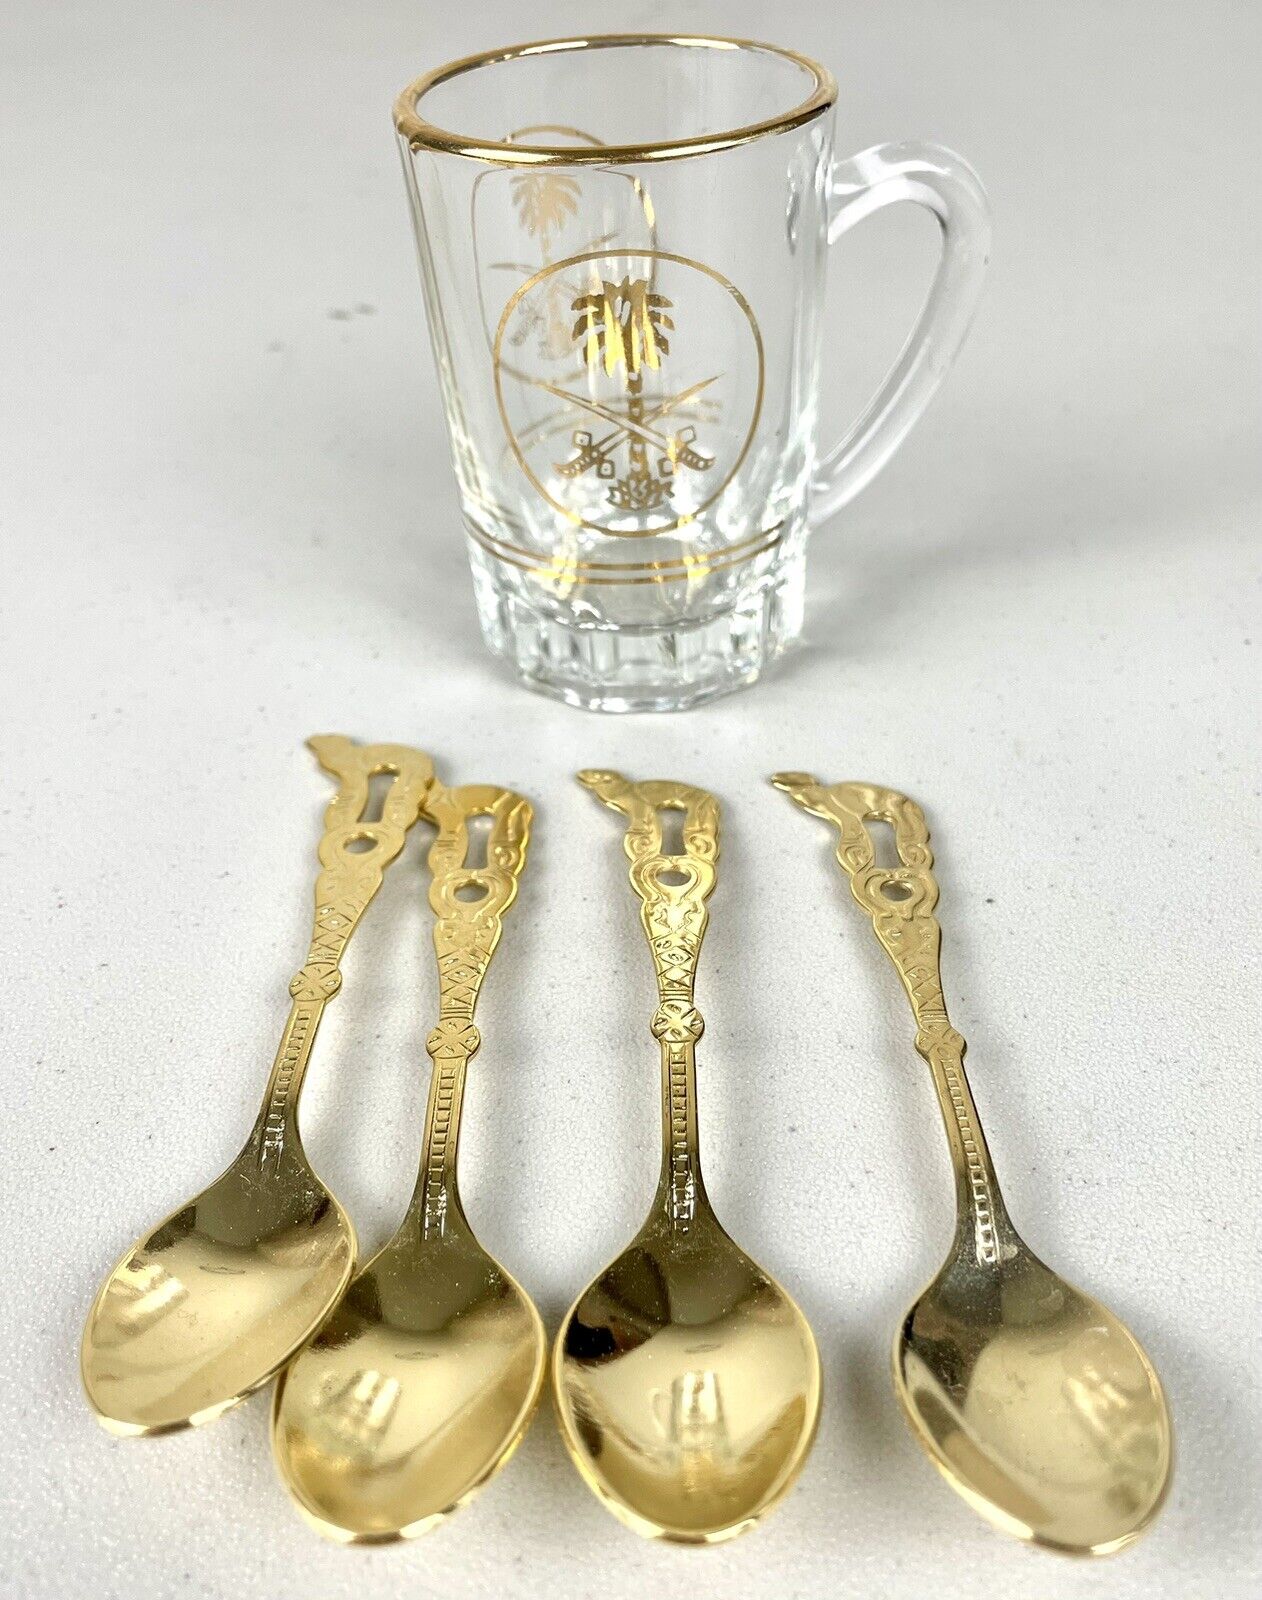 Vintage Saudi Arabia Arabic Middle East Tea Glass With Gold Camel Spoons